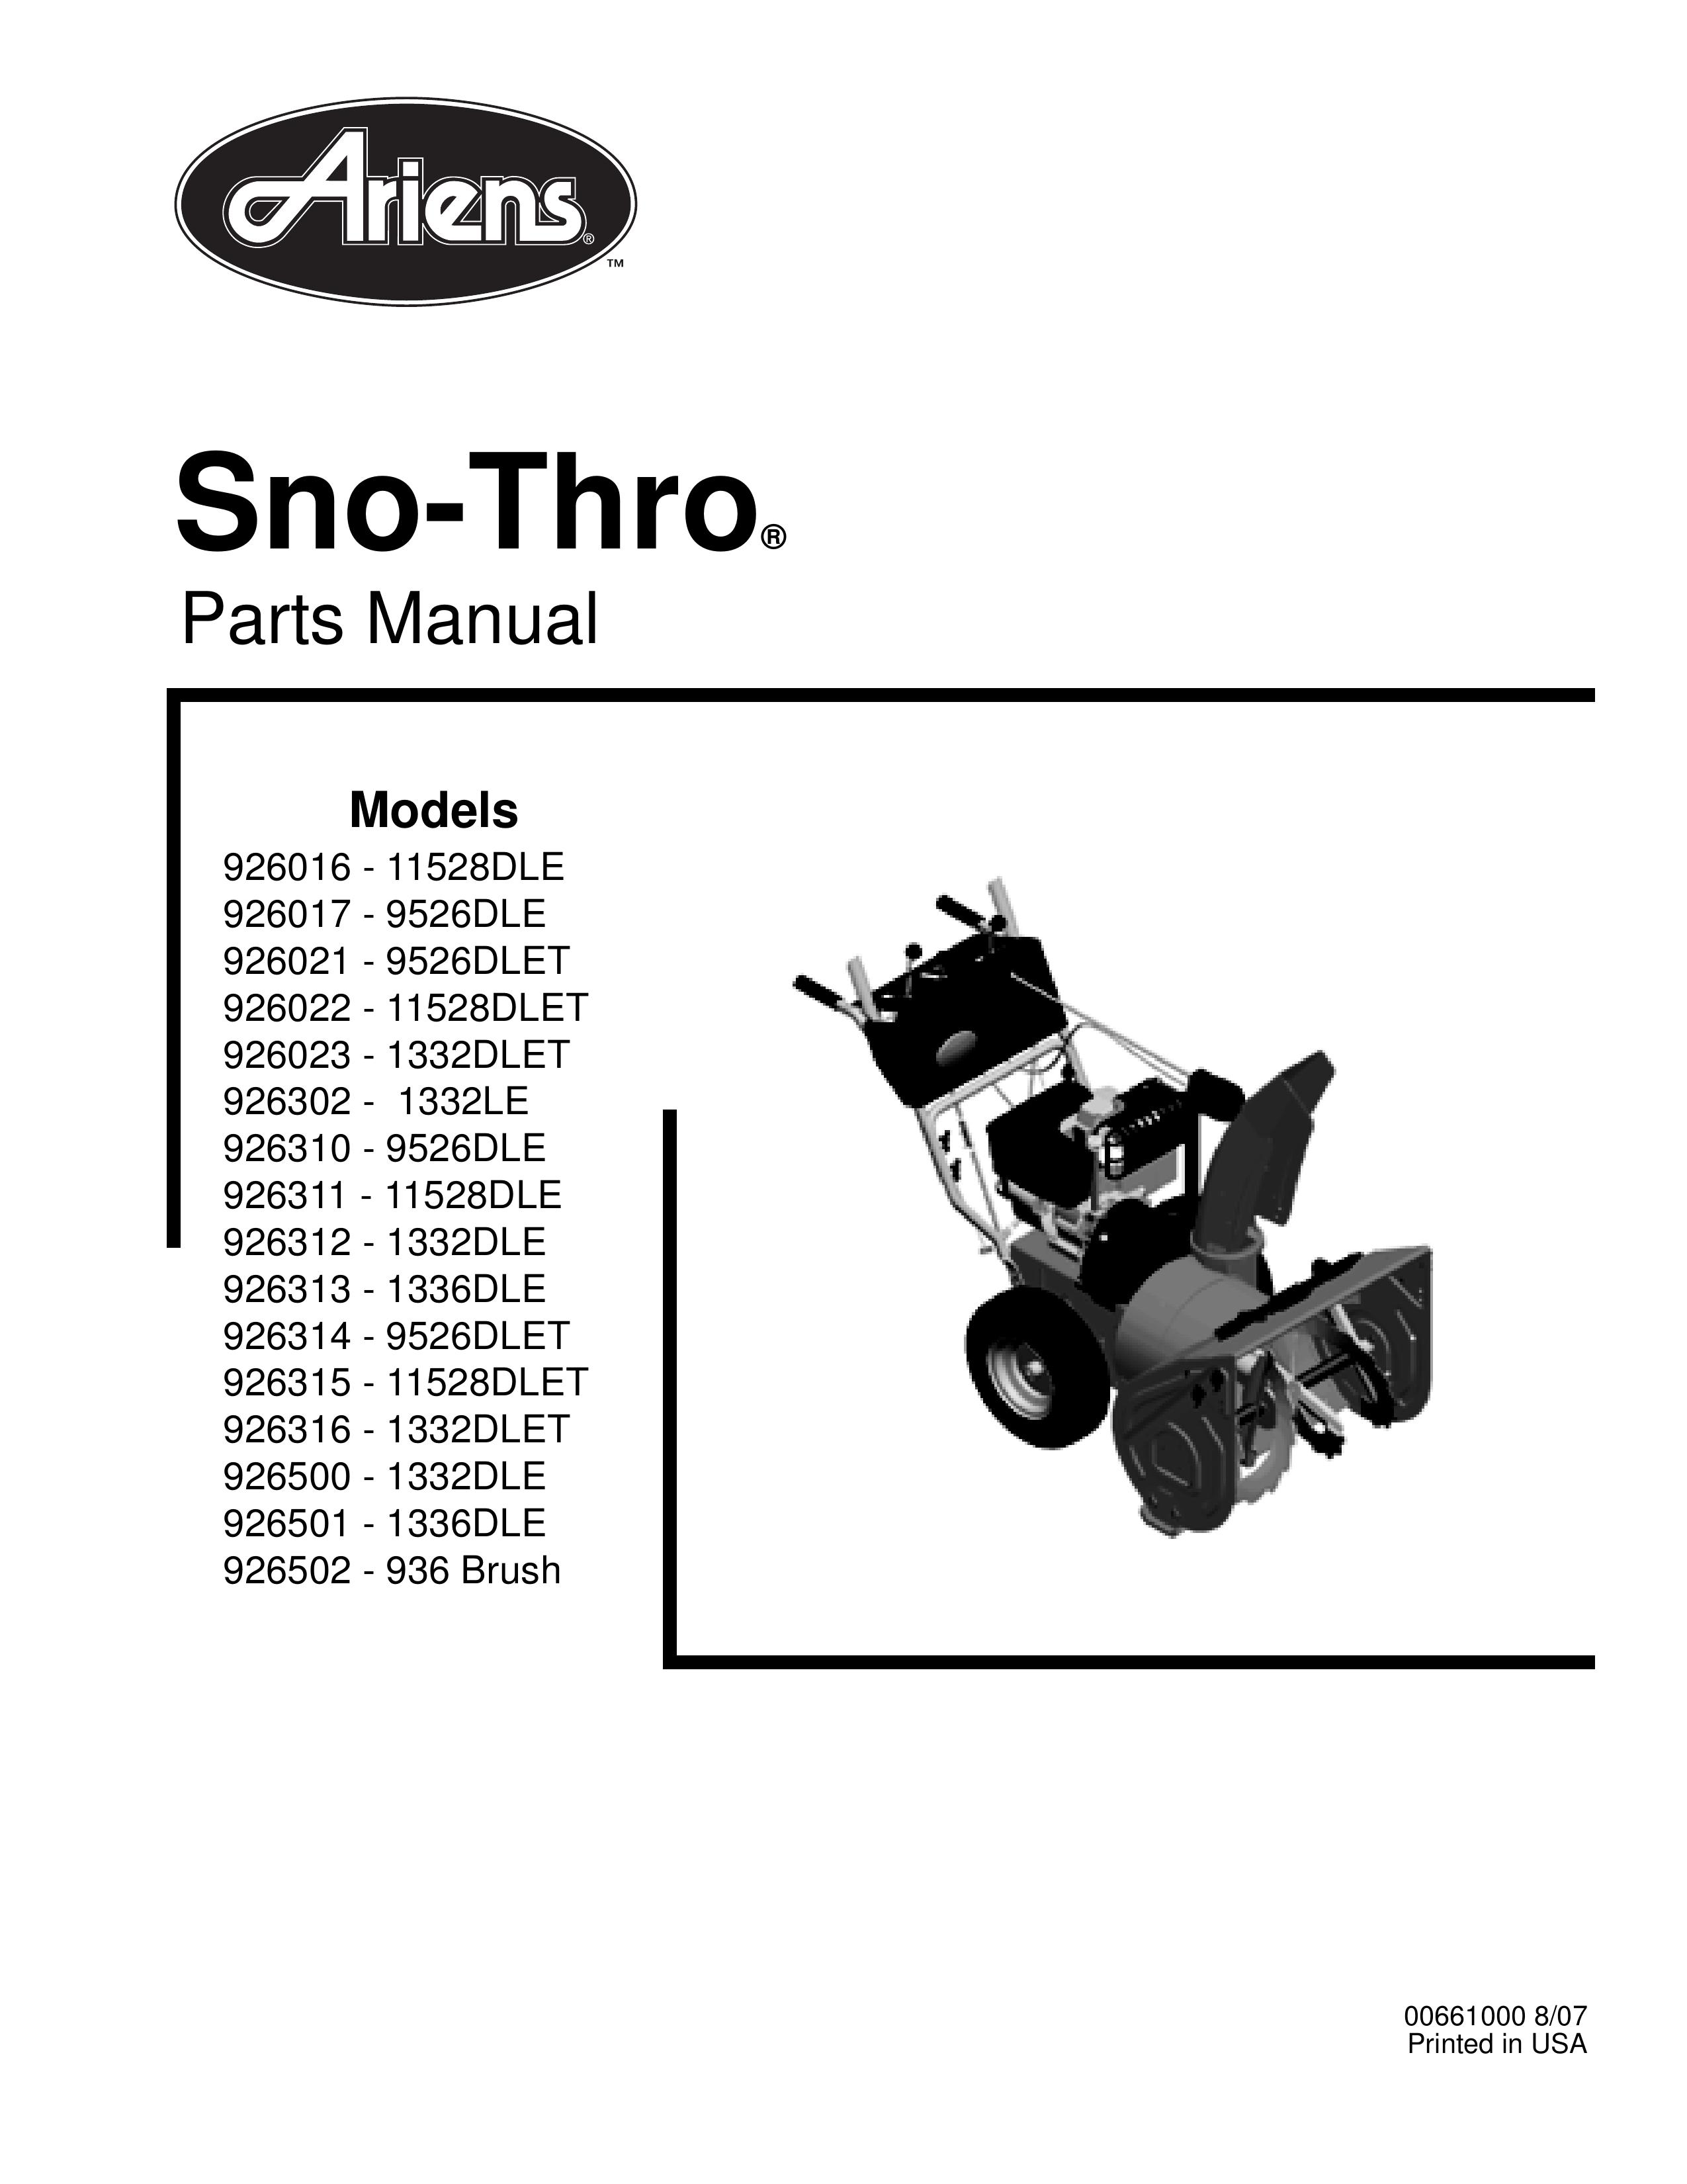 Ariens 926023 - 1332DLET Snow Blower Attachment User Manual